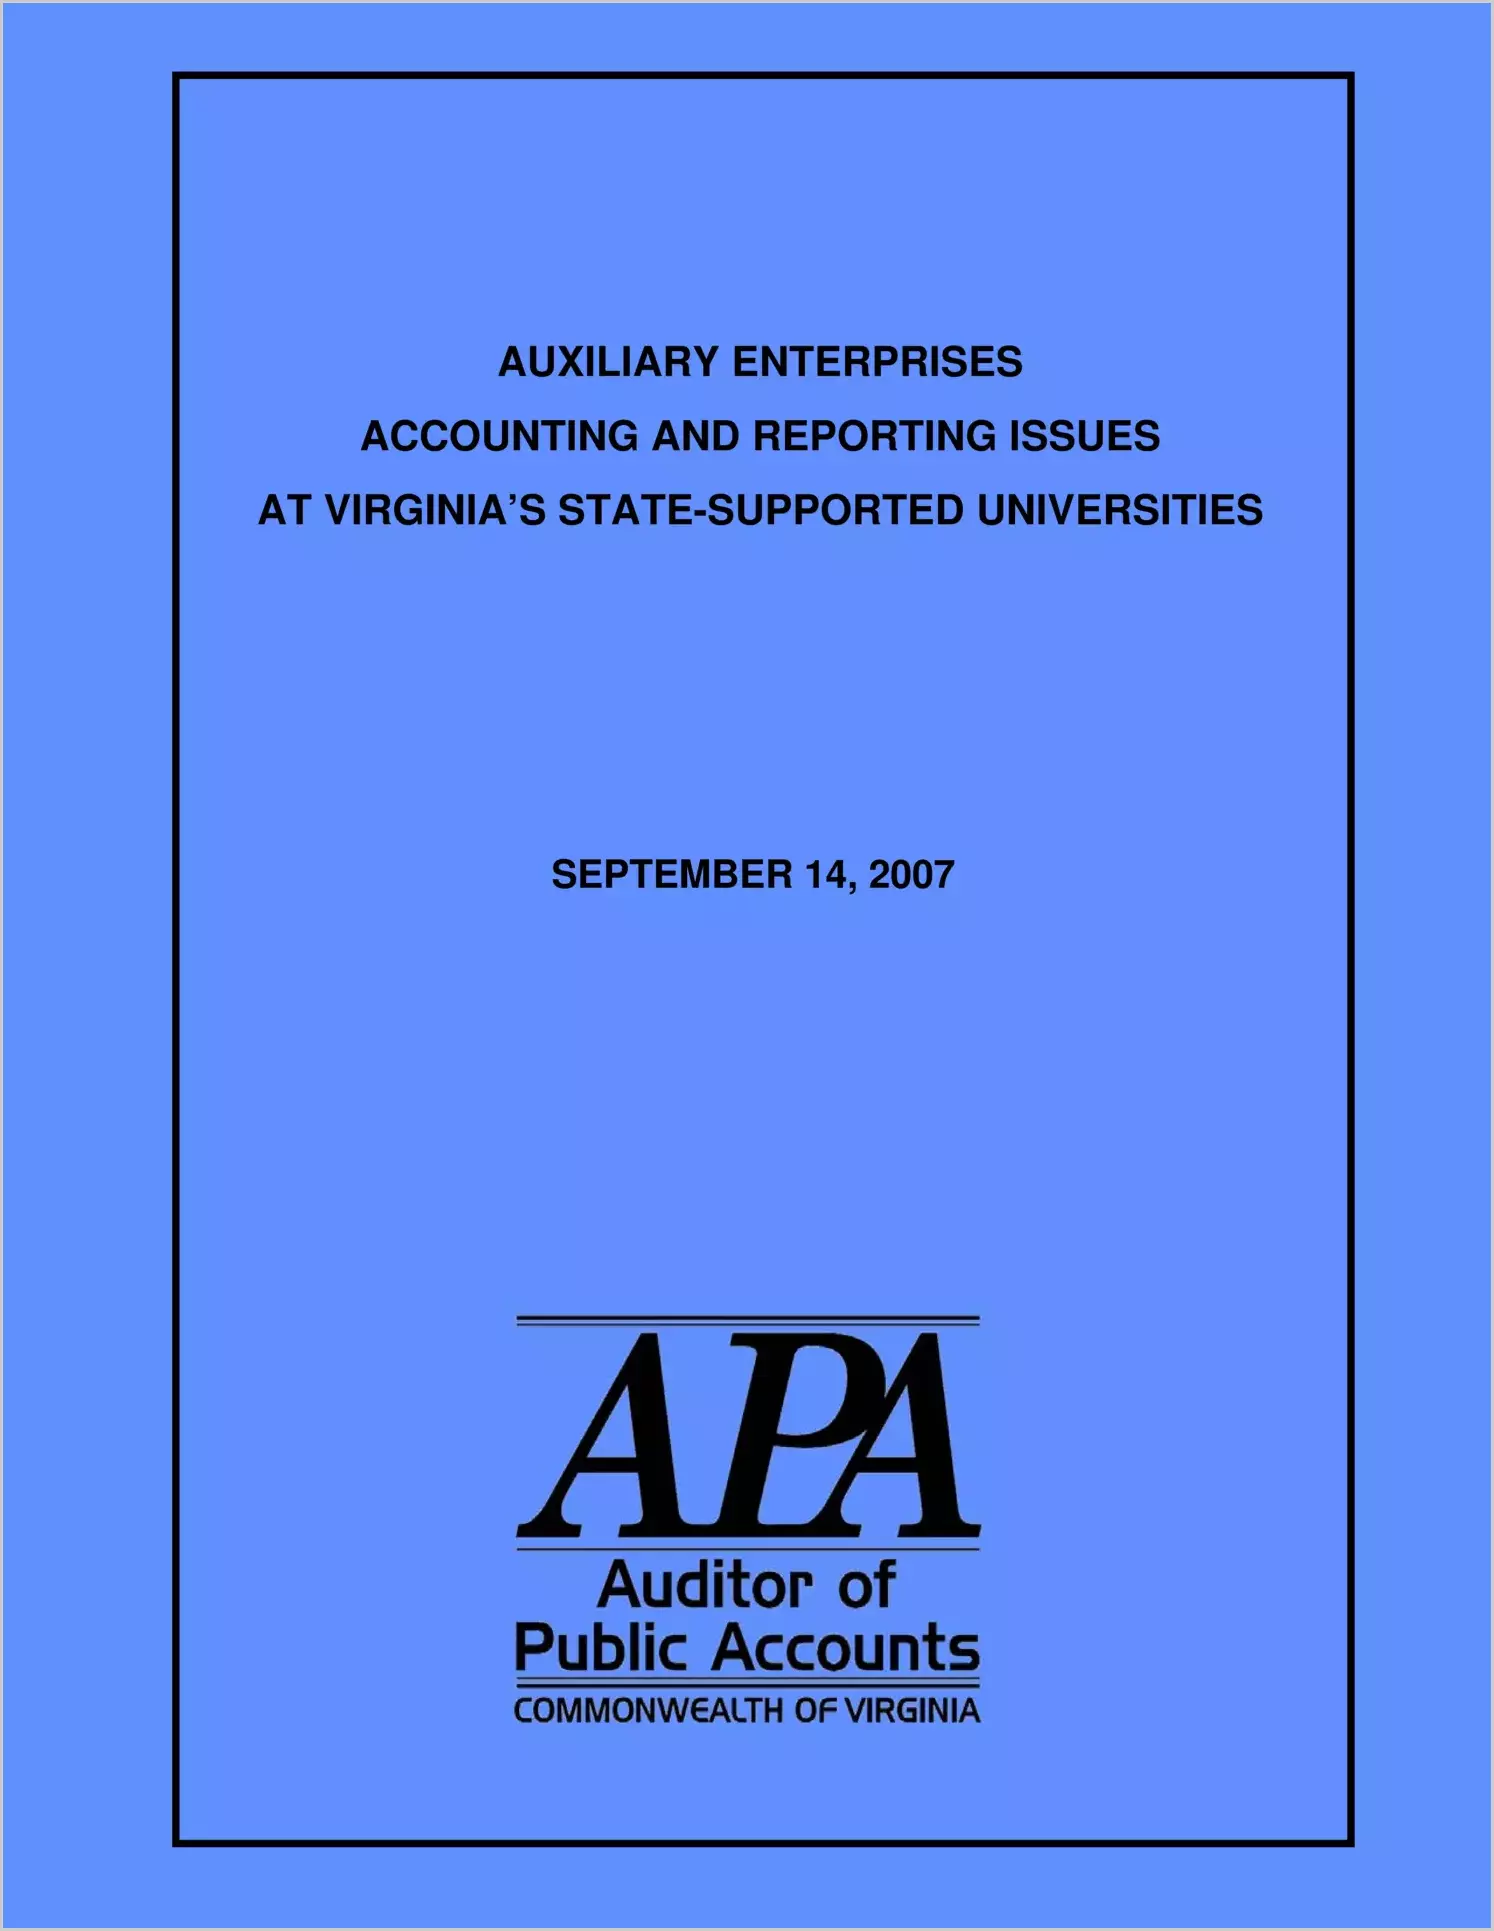 Auxiliary Enterprises Accounting and Reporting Issues at Virginias State-Supported Universities(Report Date:September 14, 2007)